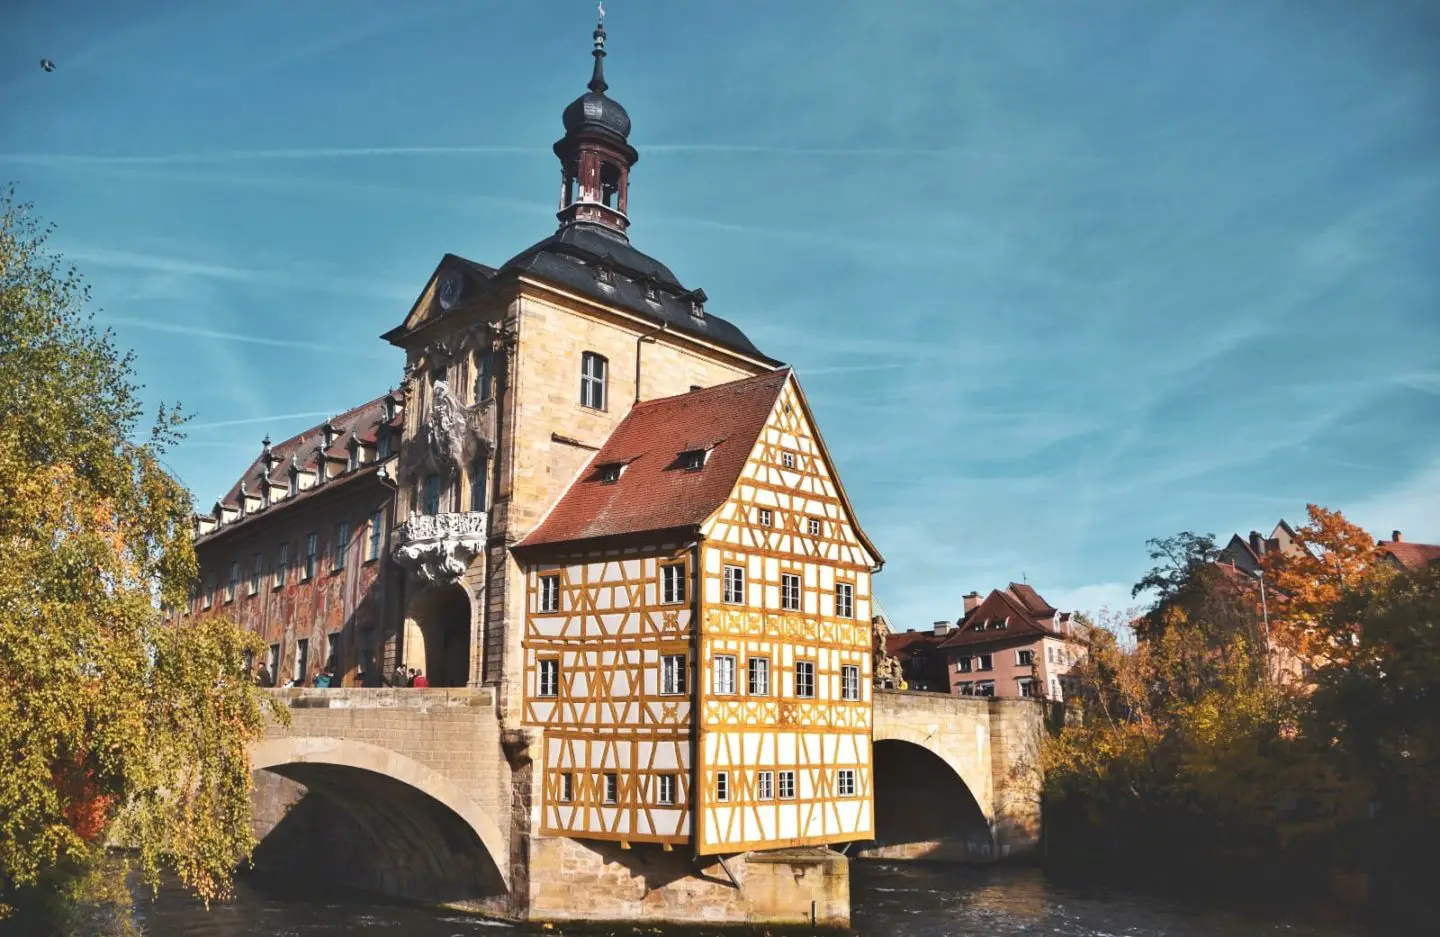 Best things to do in Bamberg – One day in Bamberg, Germany